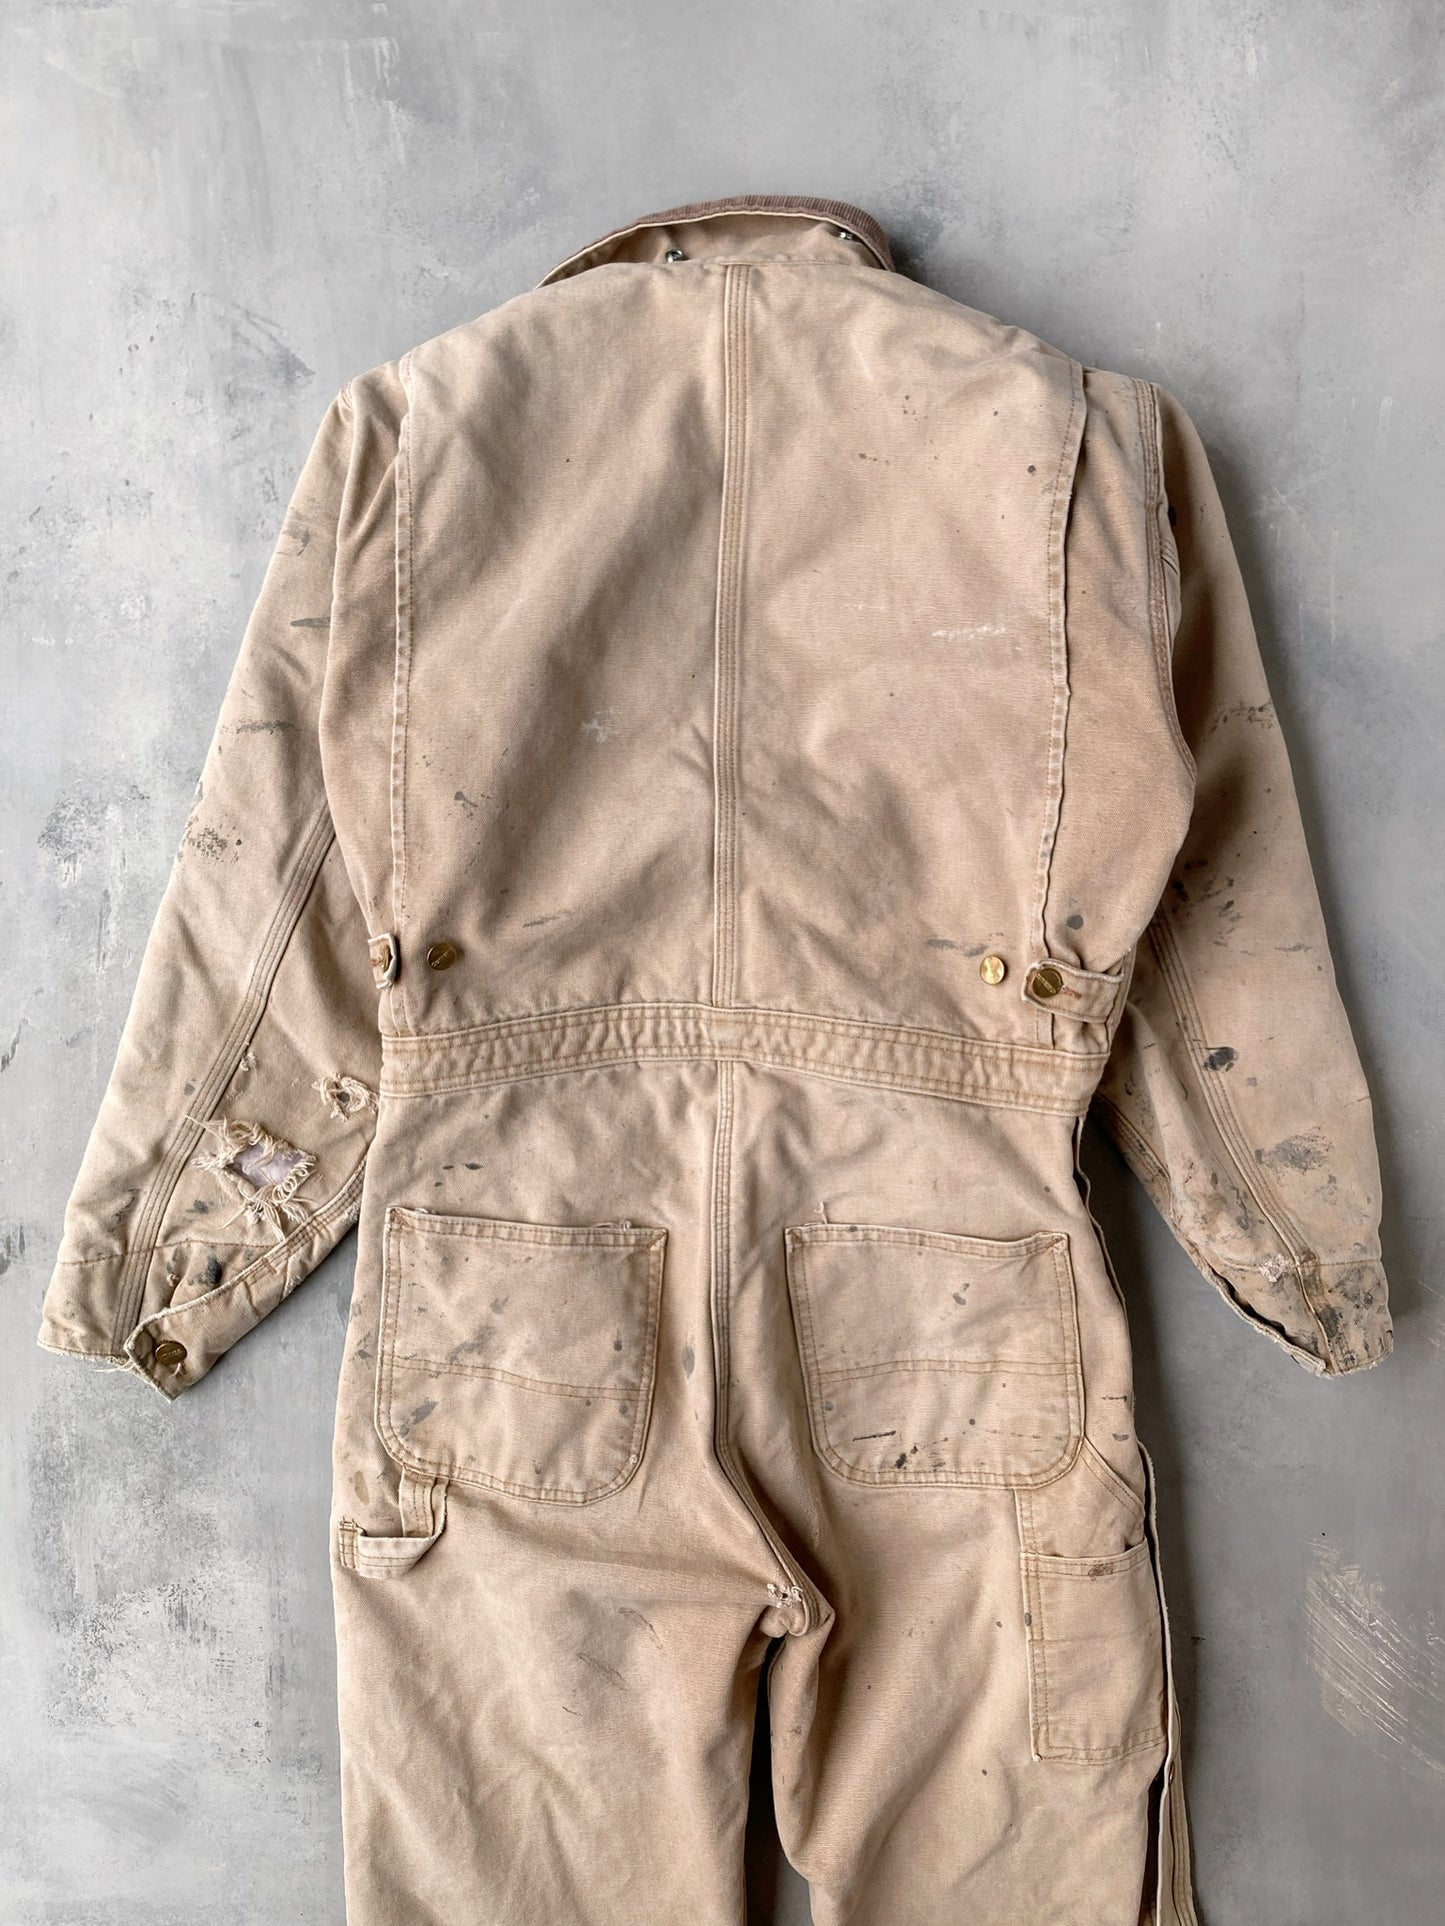 Thrashed Carhartt Insulated Coveralls - Small